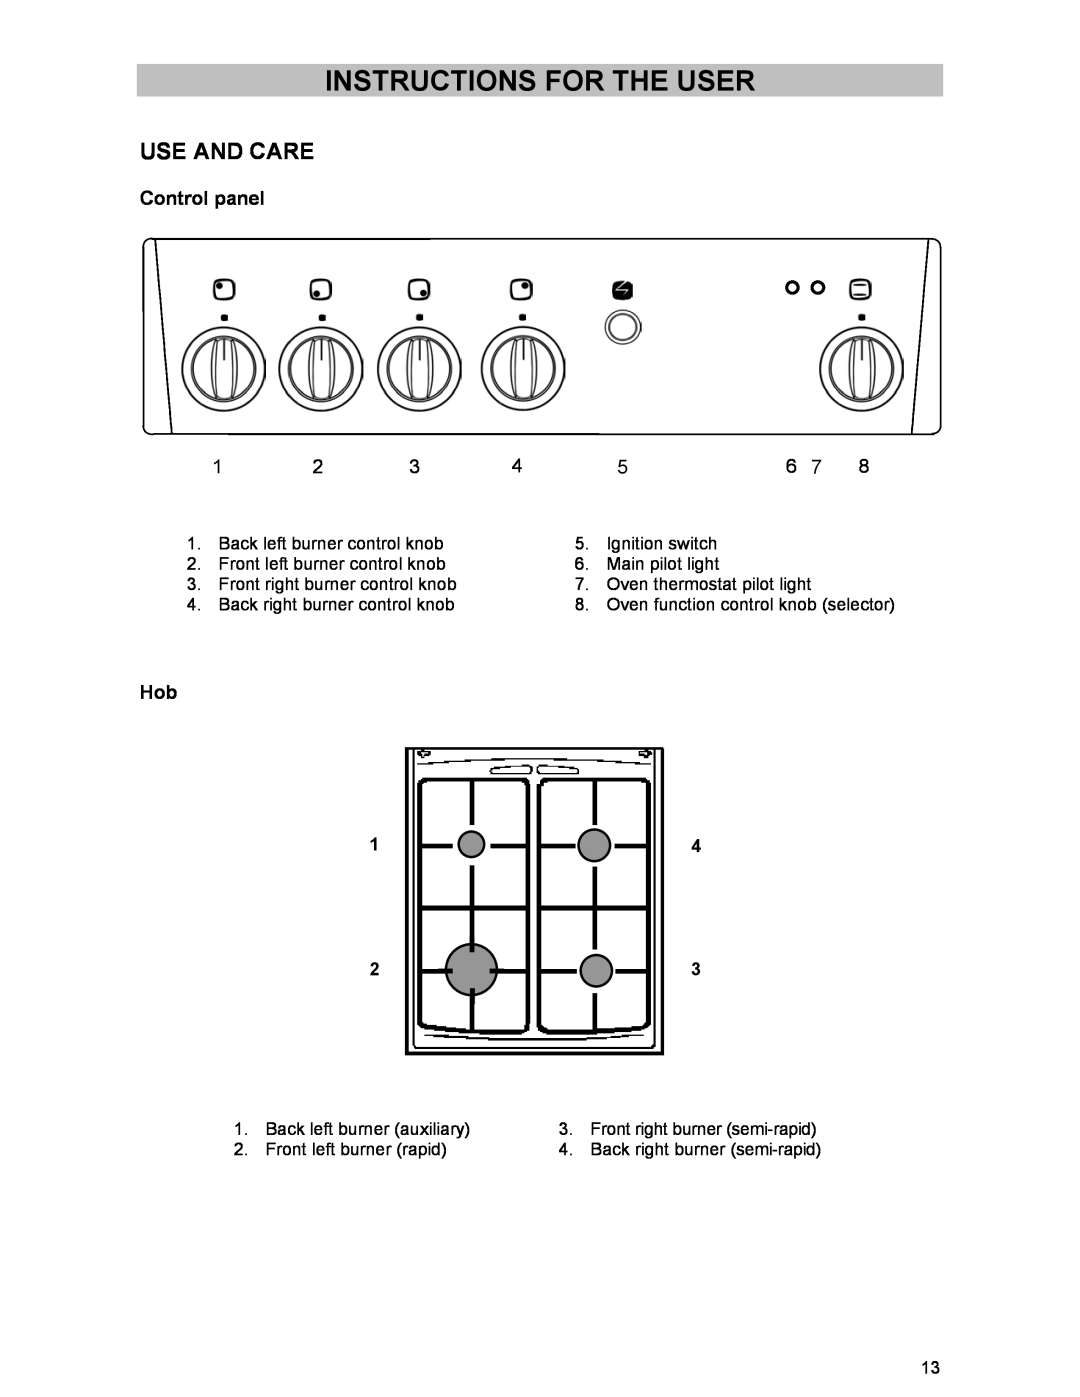 Electrolux DSO51DF manual Instructions For The User, Use And Care, Control panel 